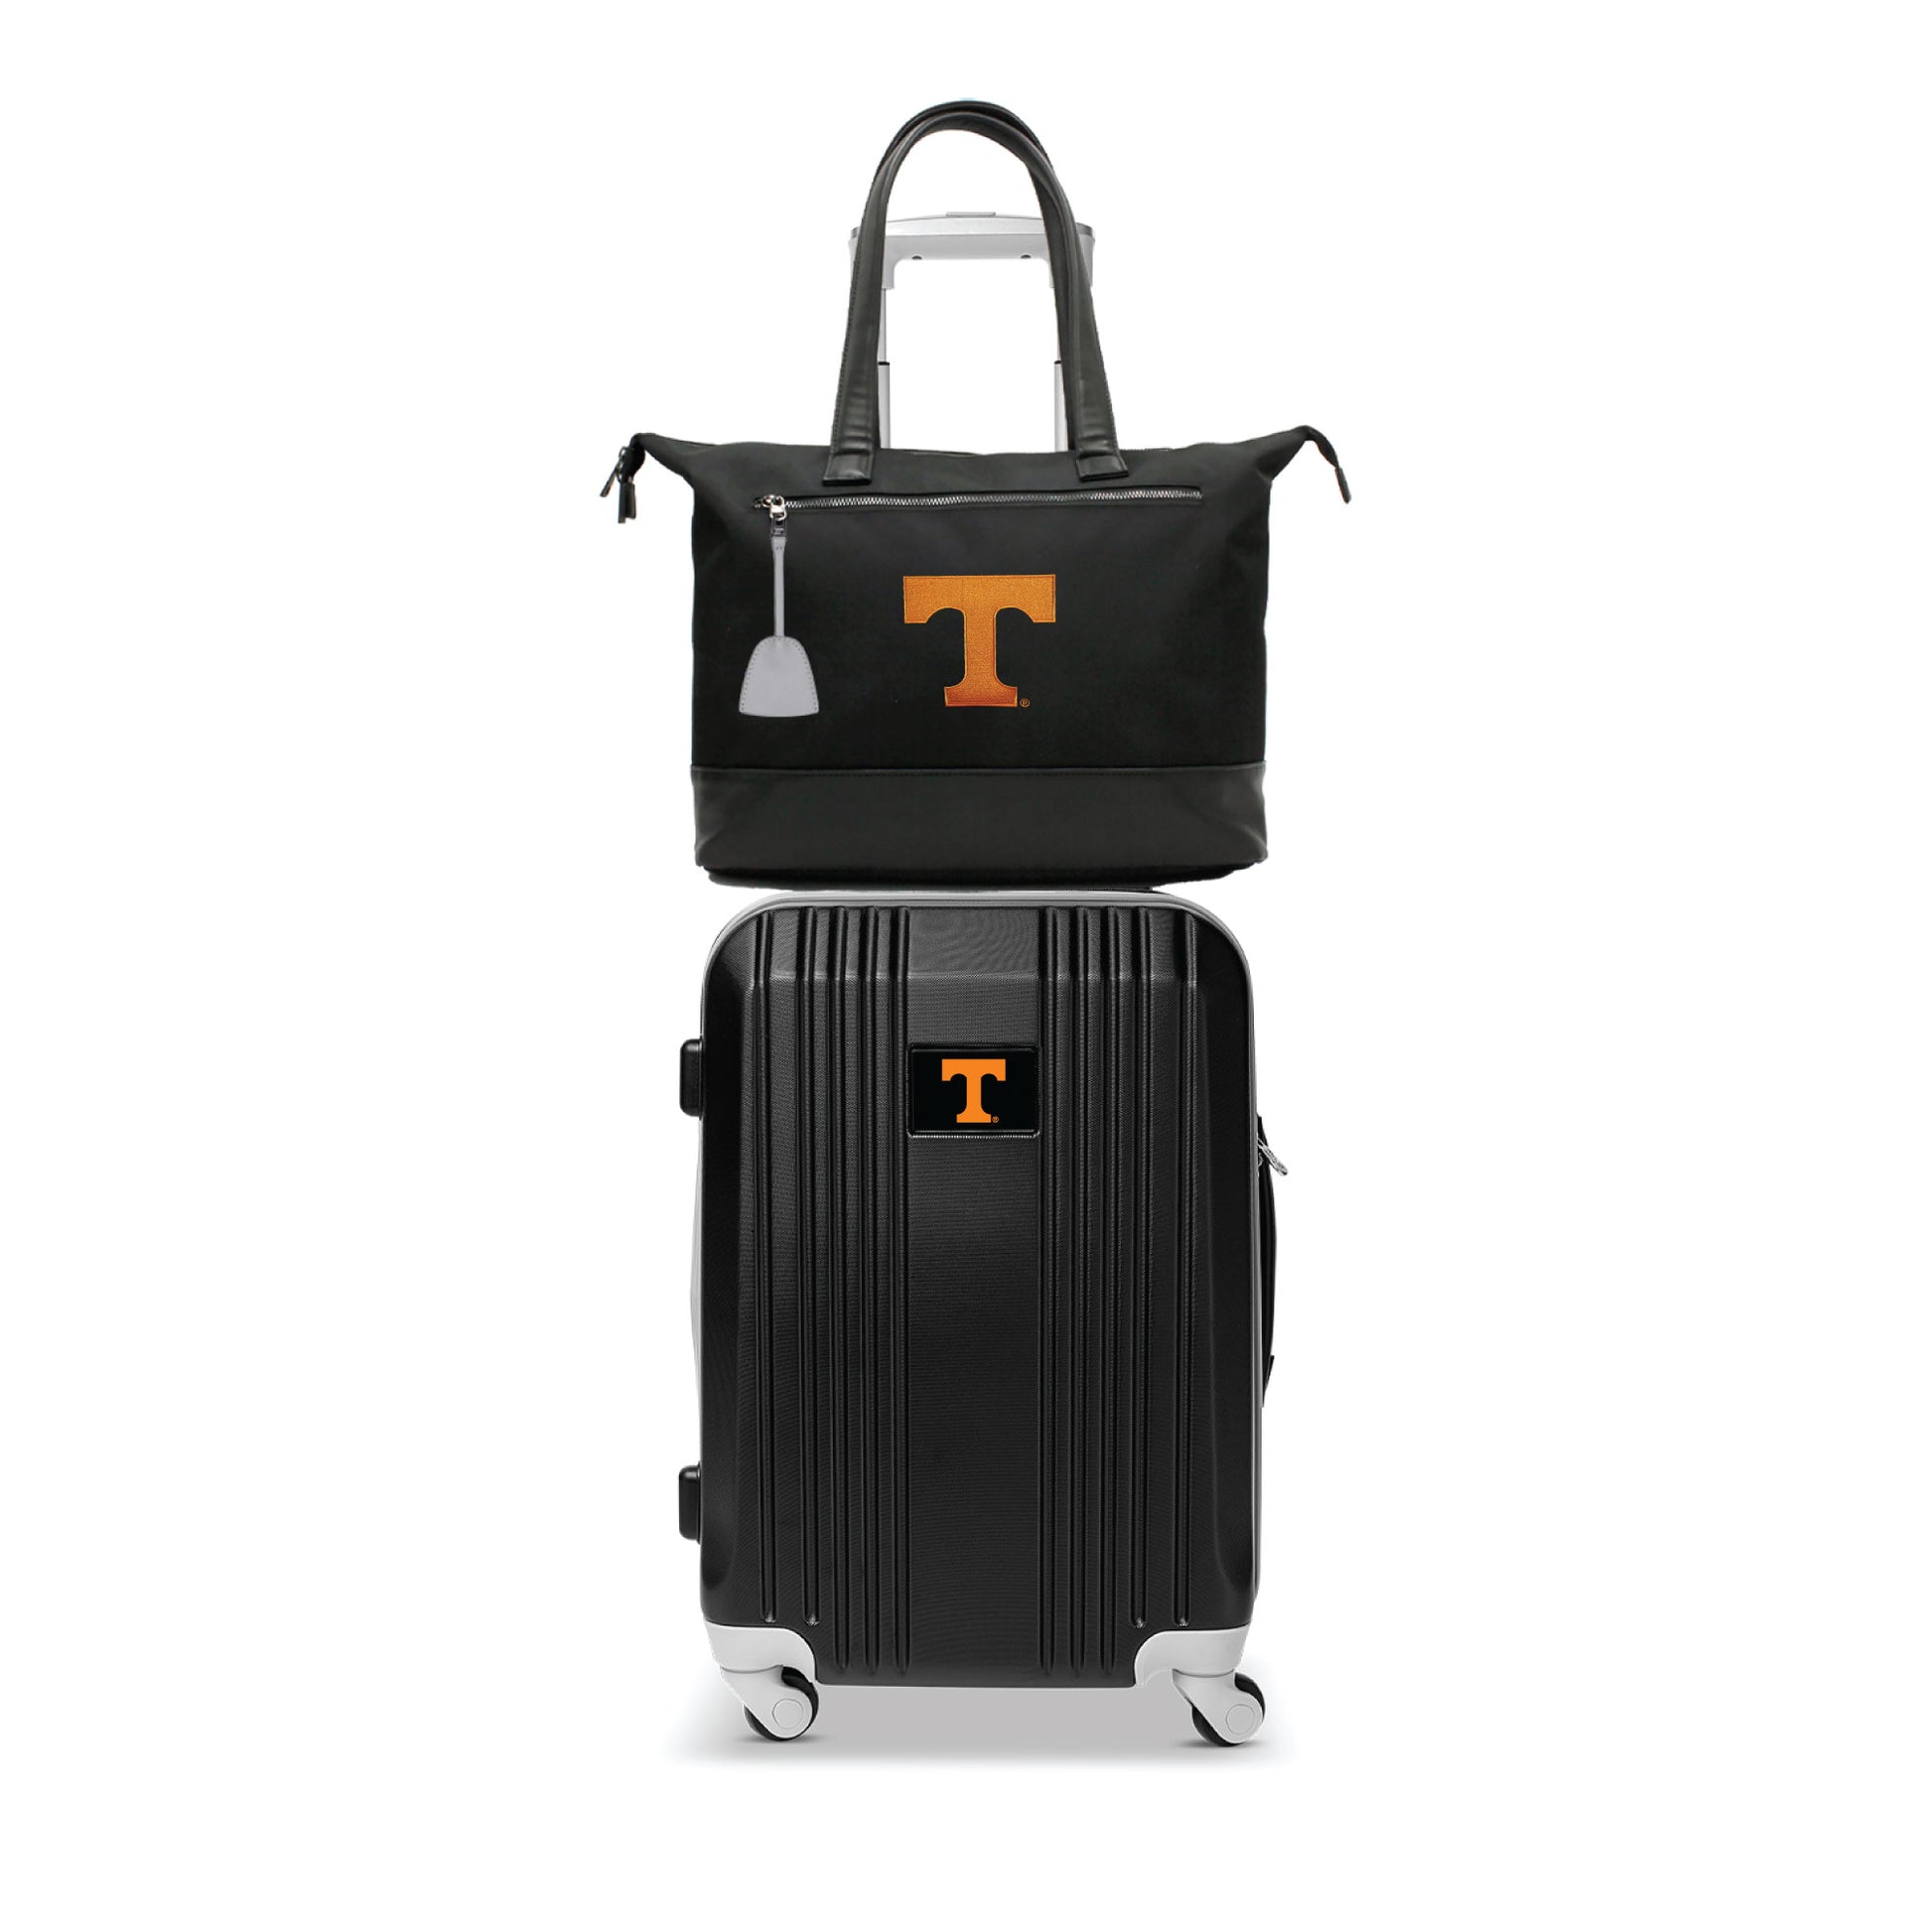 Tennessee Vols Premium Laptop Tote Bag and Luggage Set